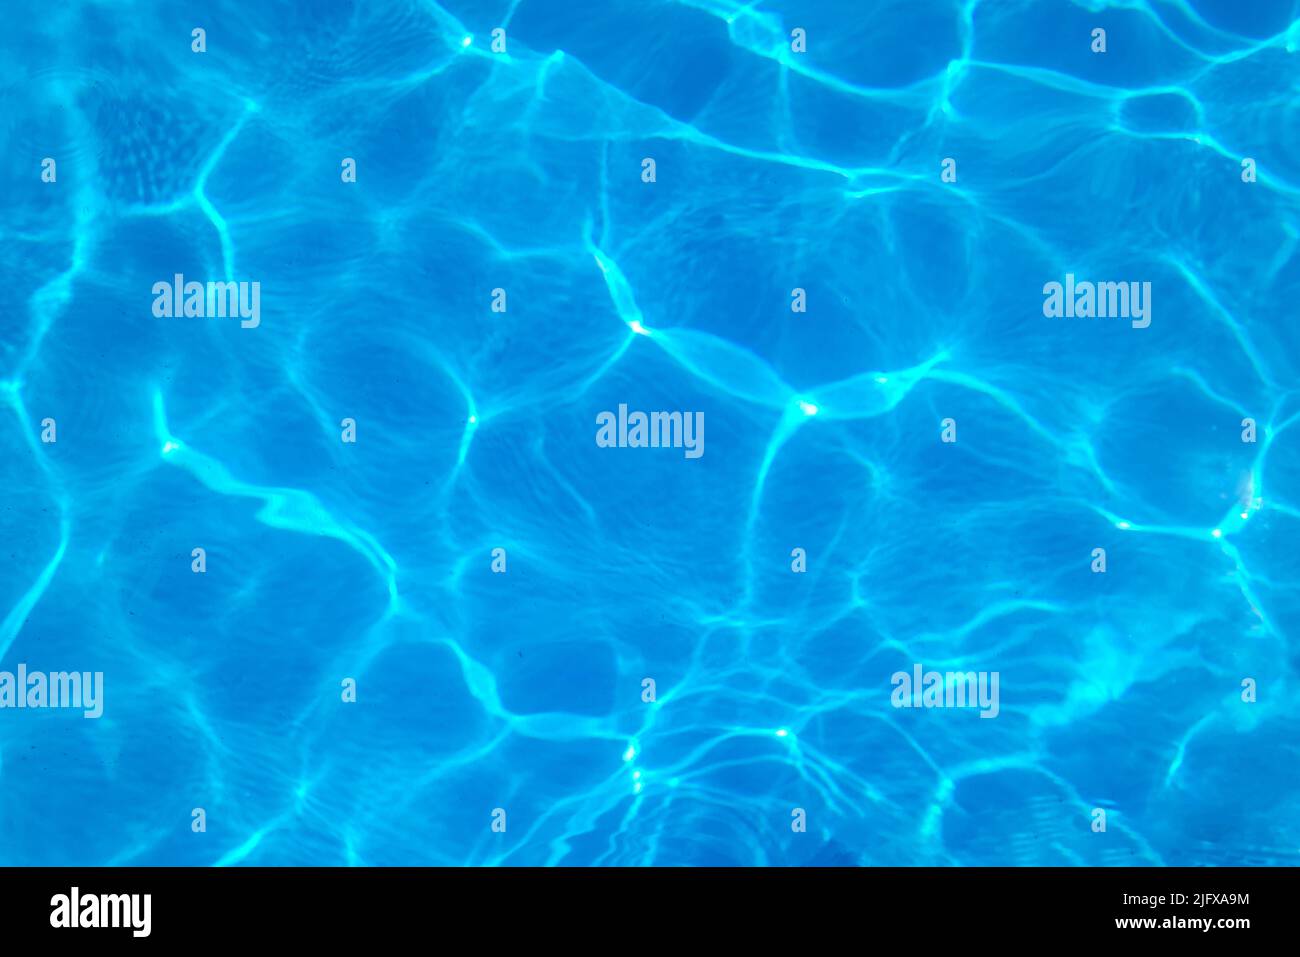 Sunlight creating abstract design on swimming pool water Stock Photo